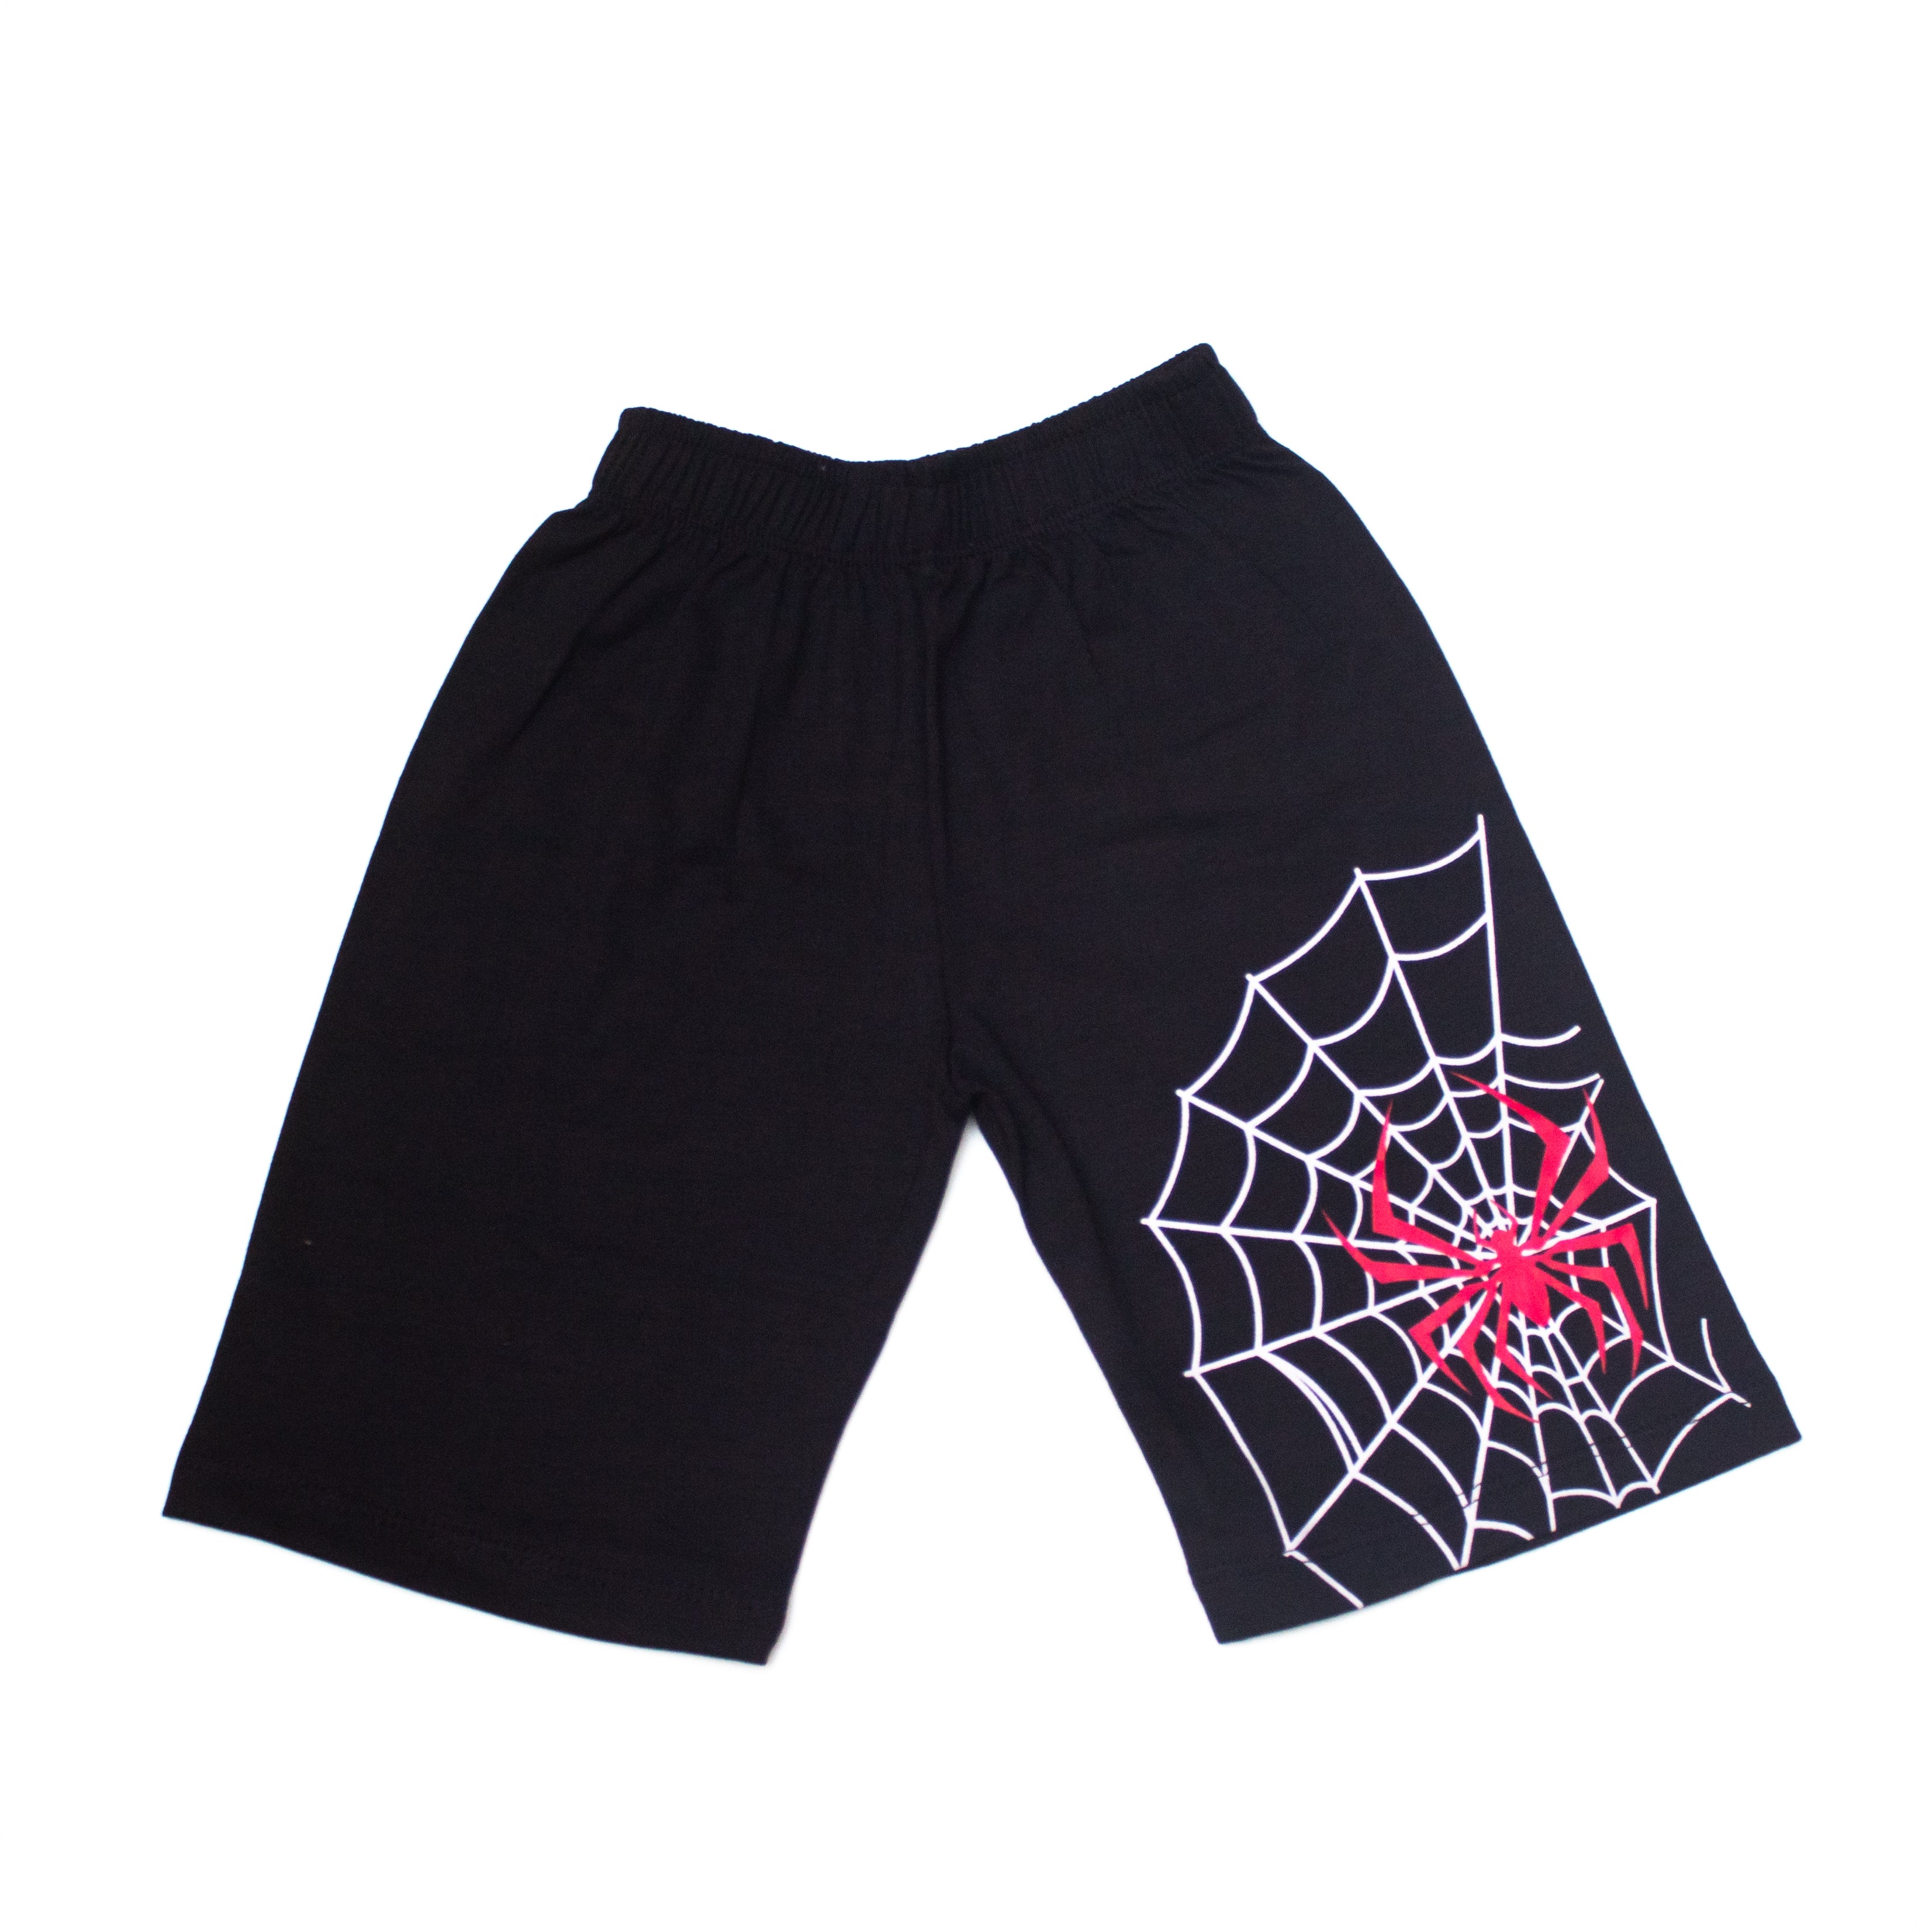 Spiderman Red T-Shirt And Shorts For Kids